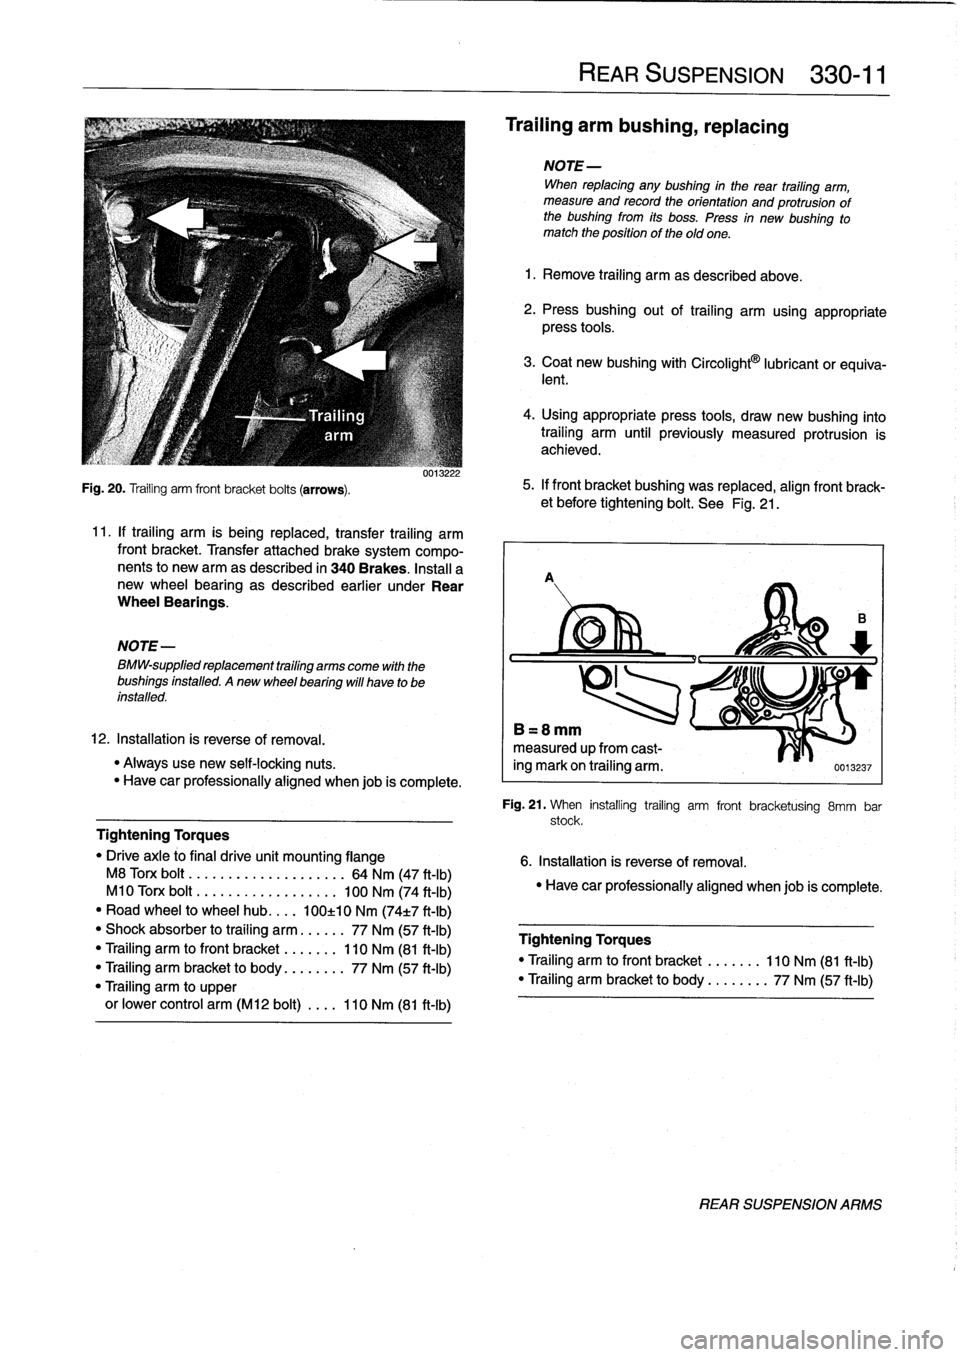 BMW 318i 1997 E36 Owners Manual 
Fig
.
20
.
Trailing
arm
front
bracket
bolts
(arrows)
.

NOTE-

BMW-supplied
replacement
trailing
arms
come
with
the
bushings
installed
.
Anew
wheel
bearing
will
have
to
be
installed
.

0013222

11
.
